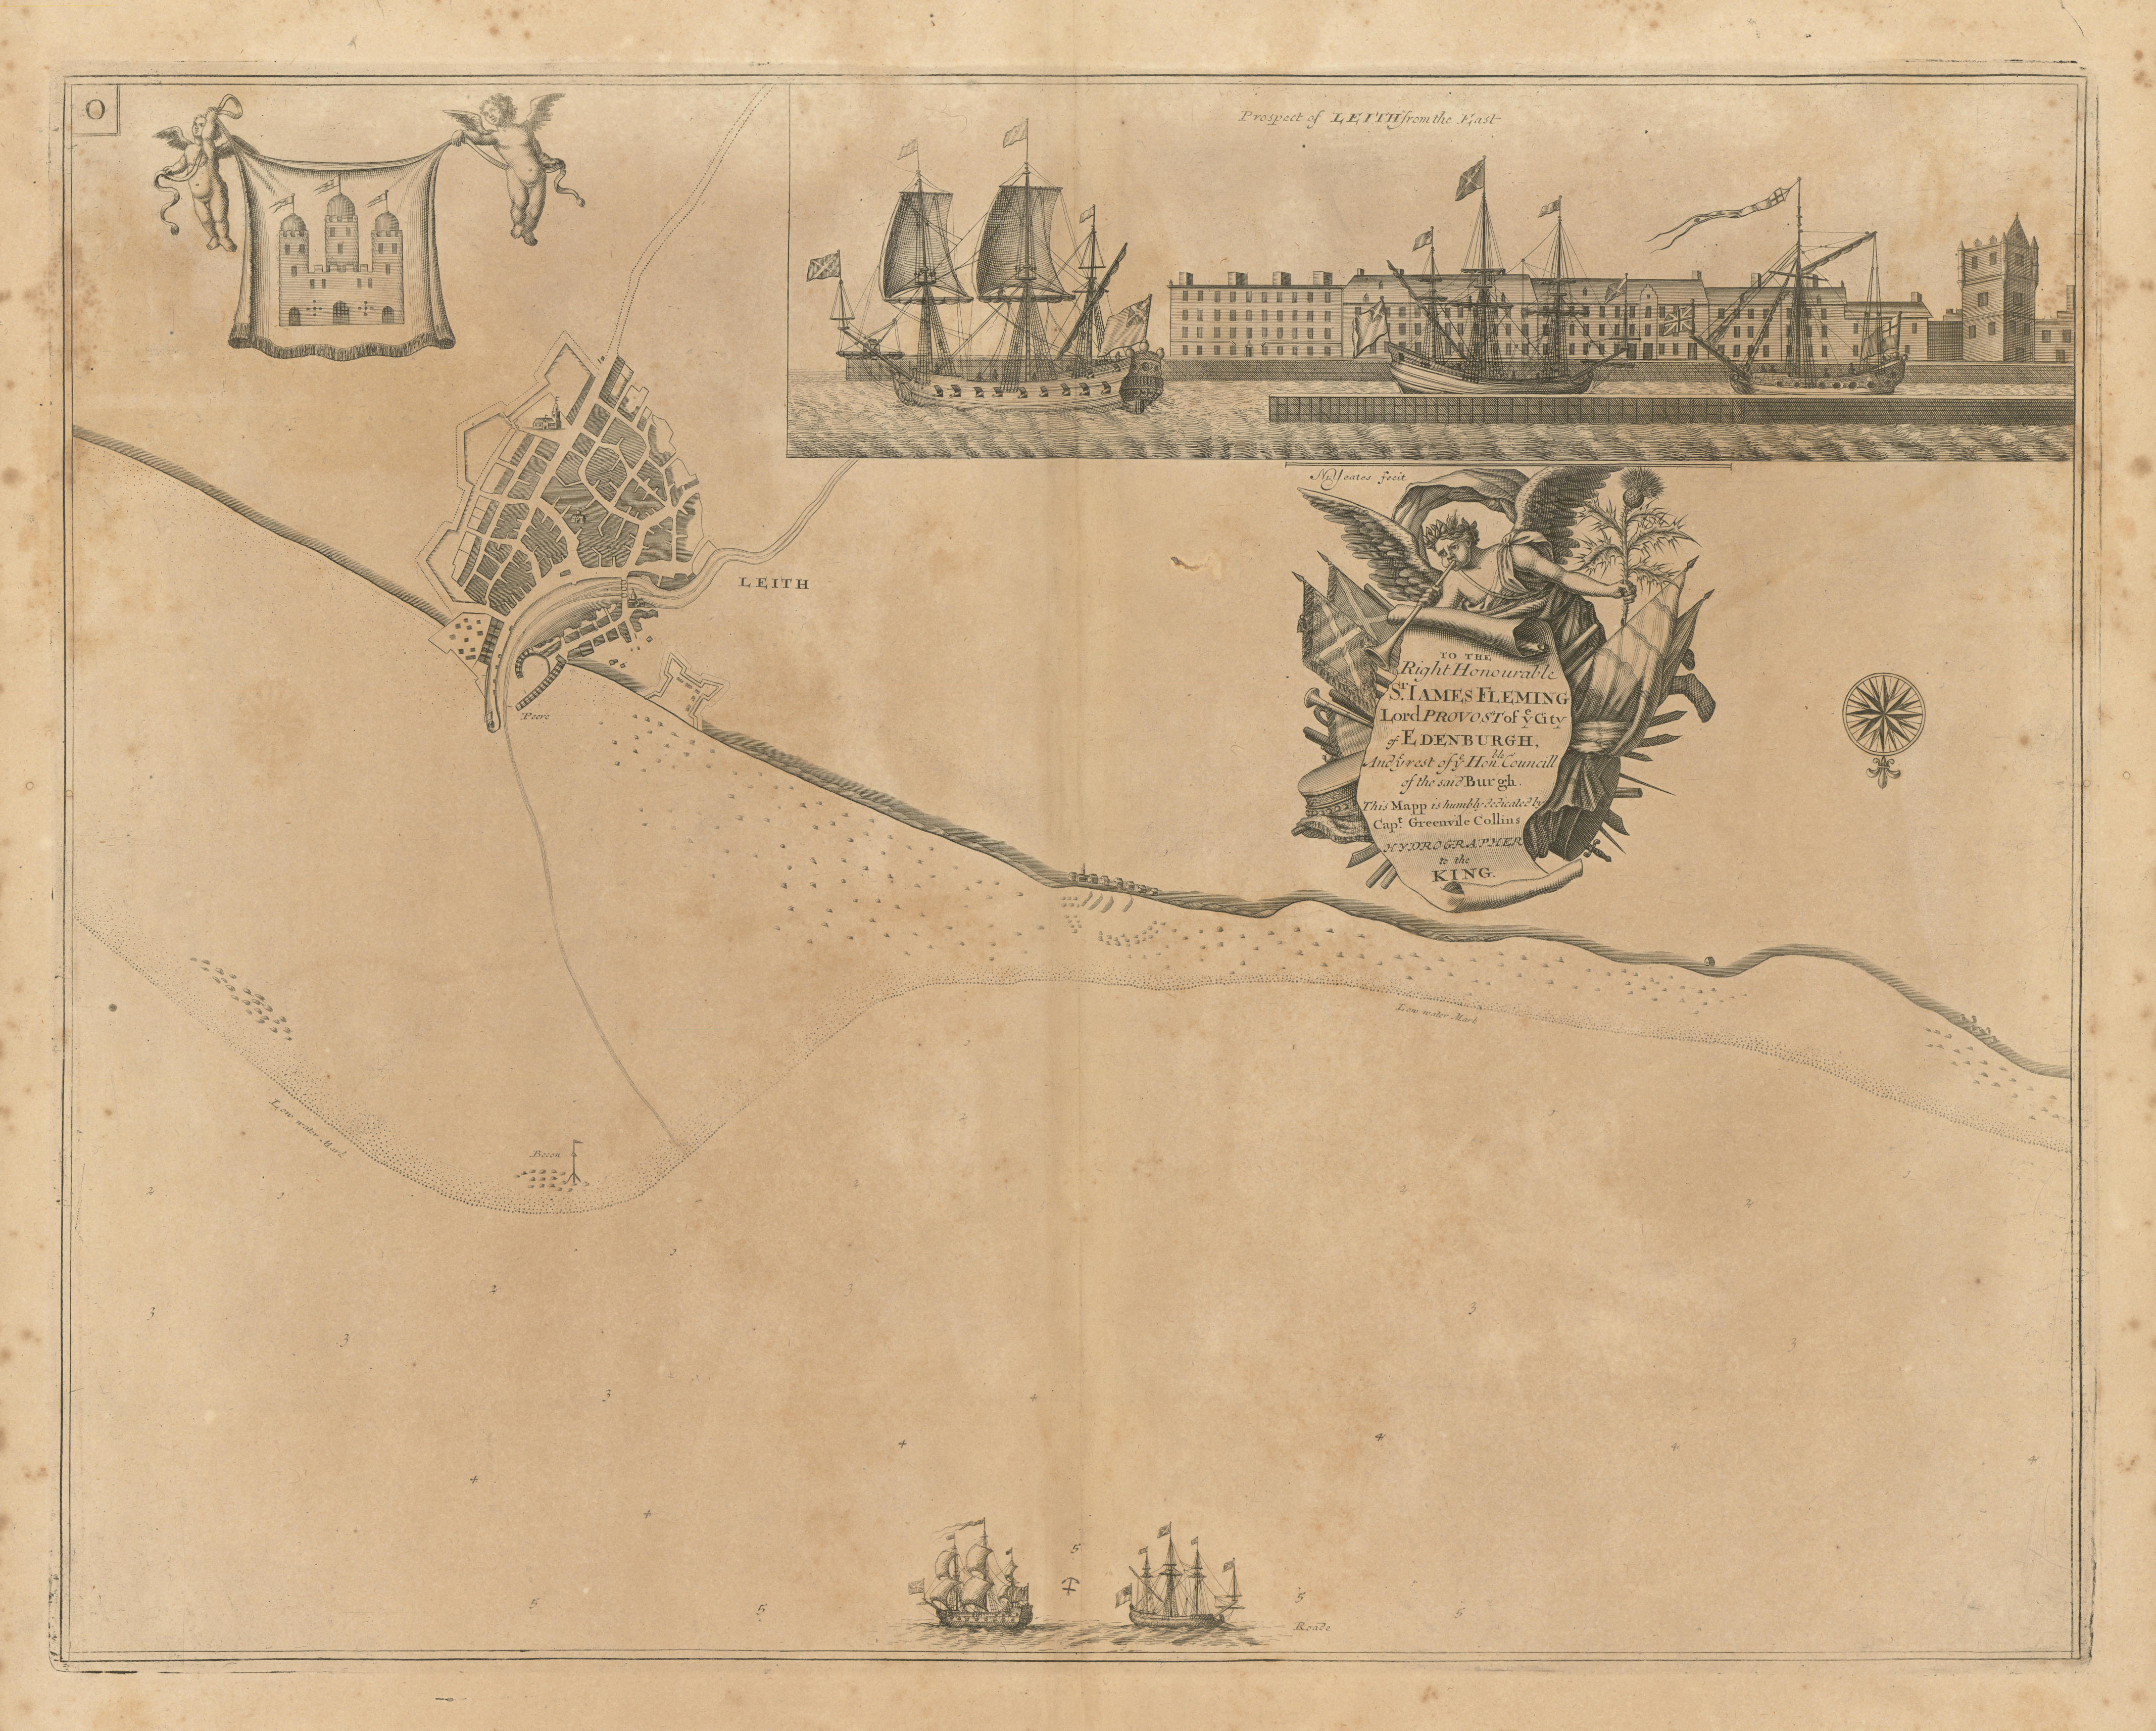 Associate Product Navigation chart & view of LEITH, by Capt Greenvile COLLINS. Edinburgh 1693 map